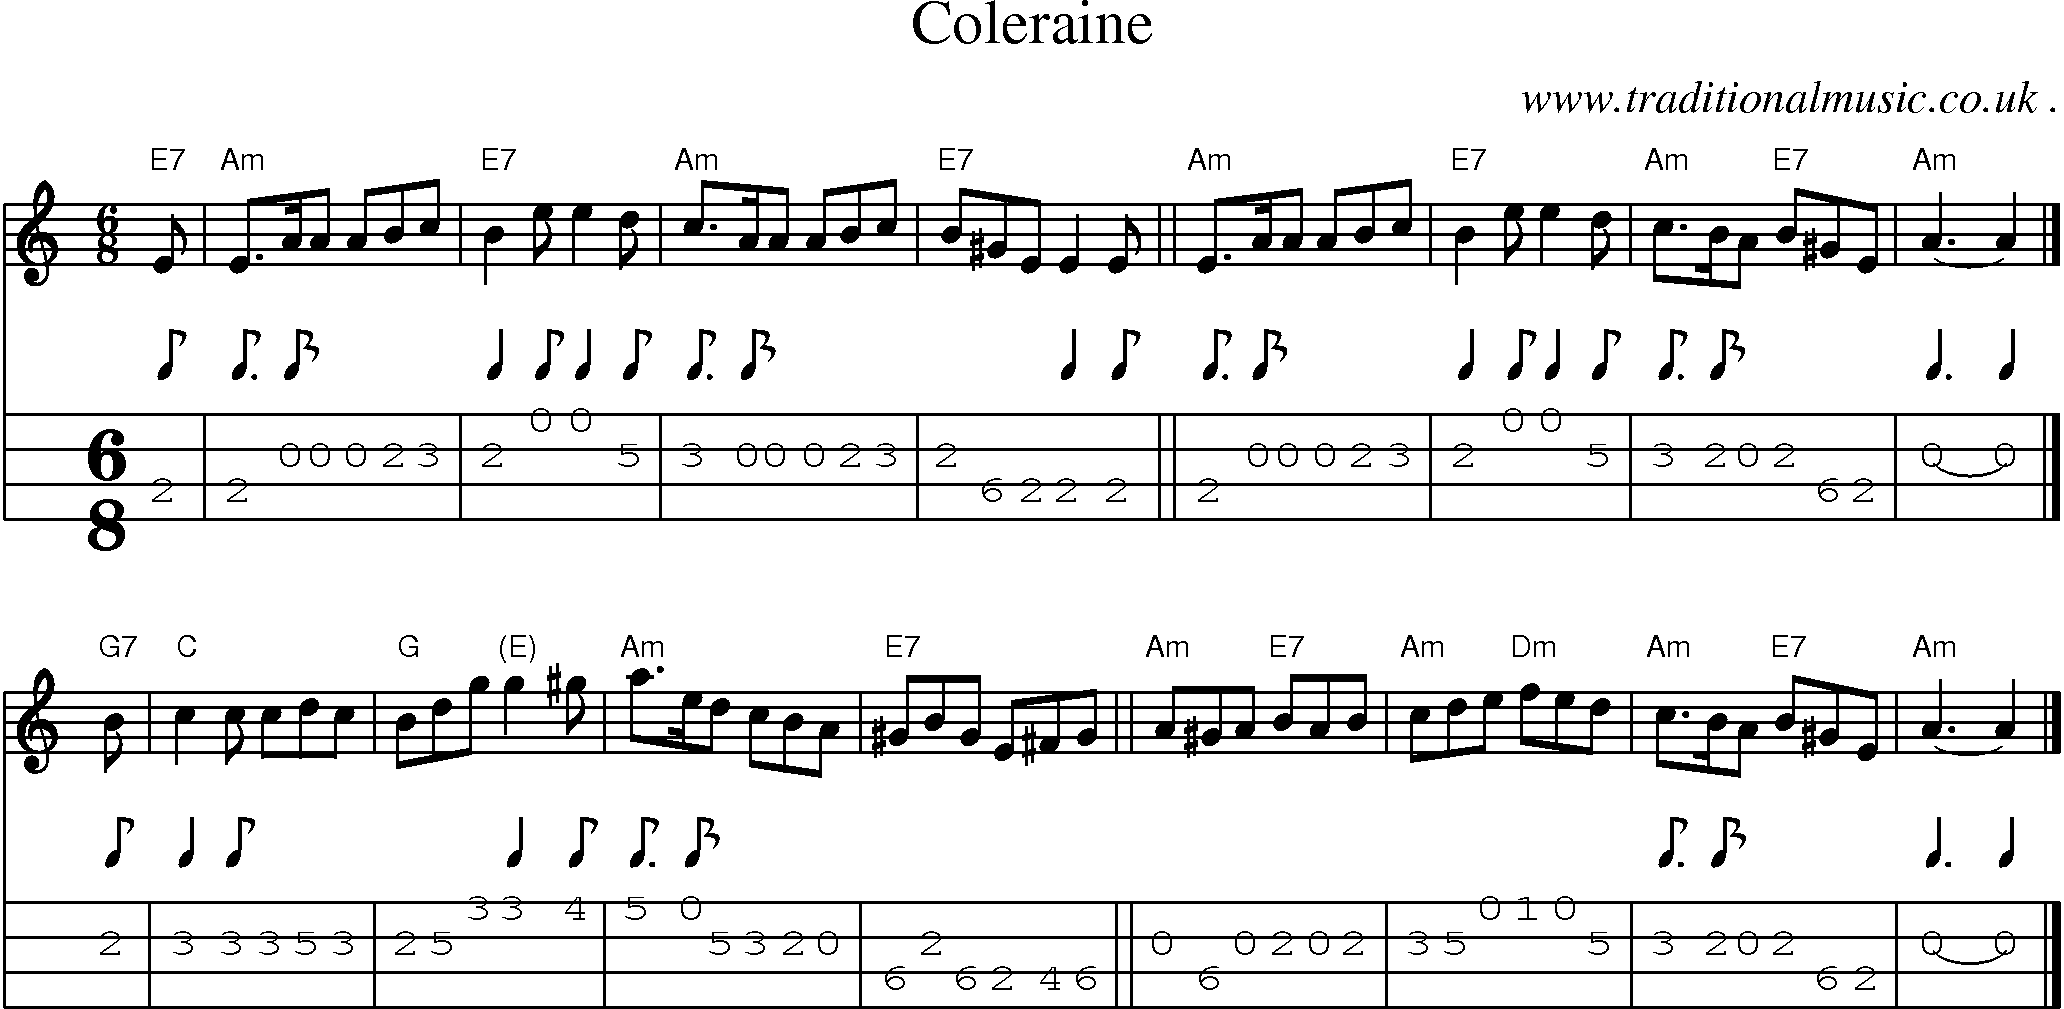 Sheet-music  score, Chords and Mandolin Tabs for Coleraine